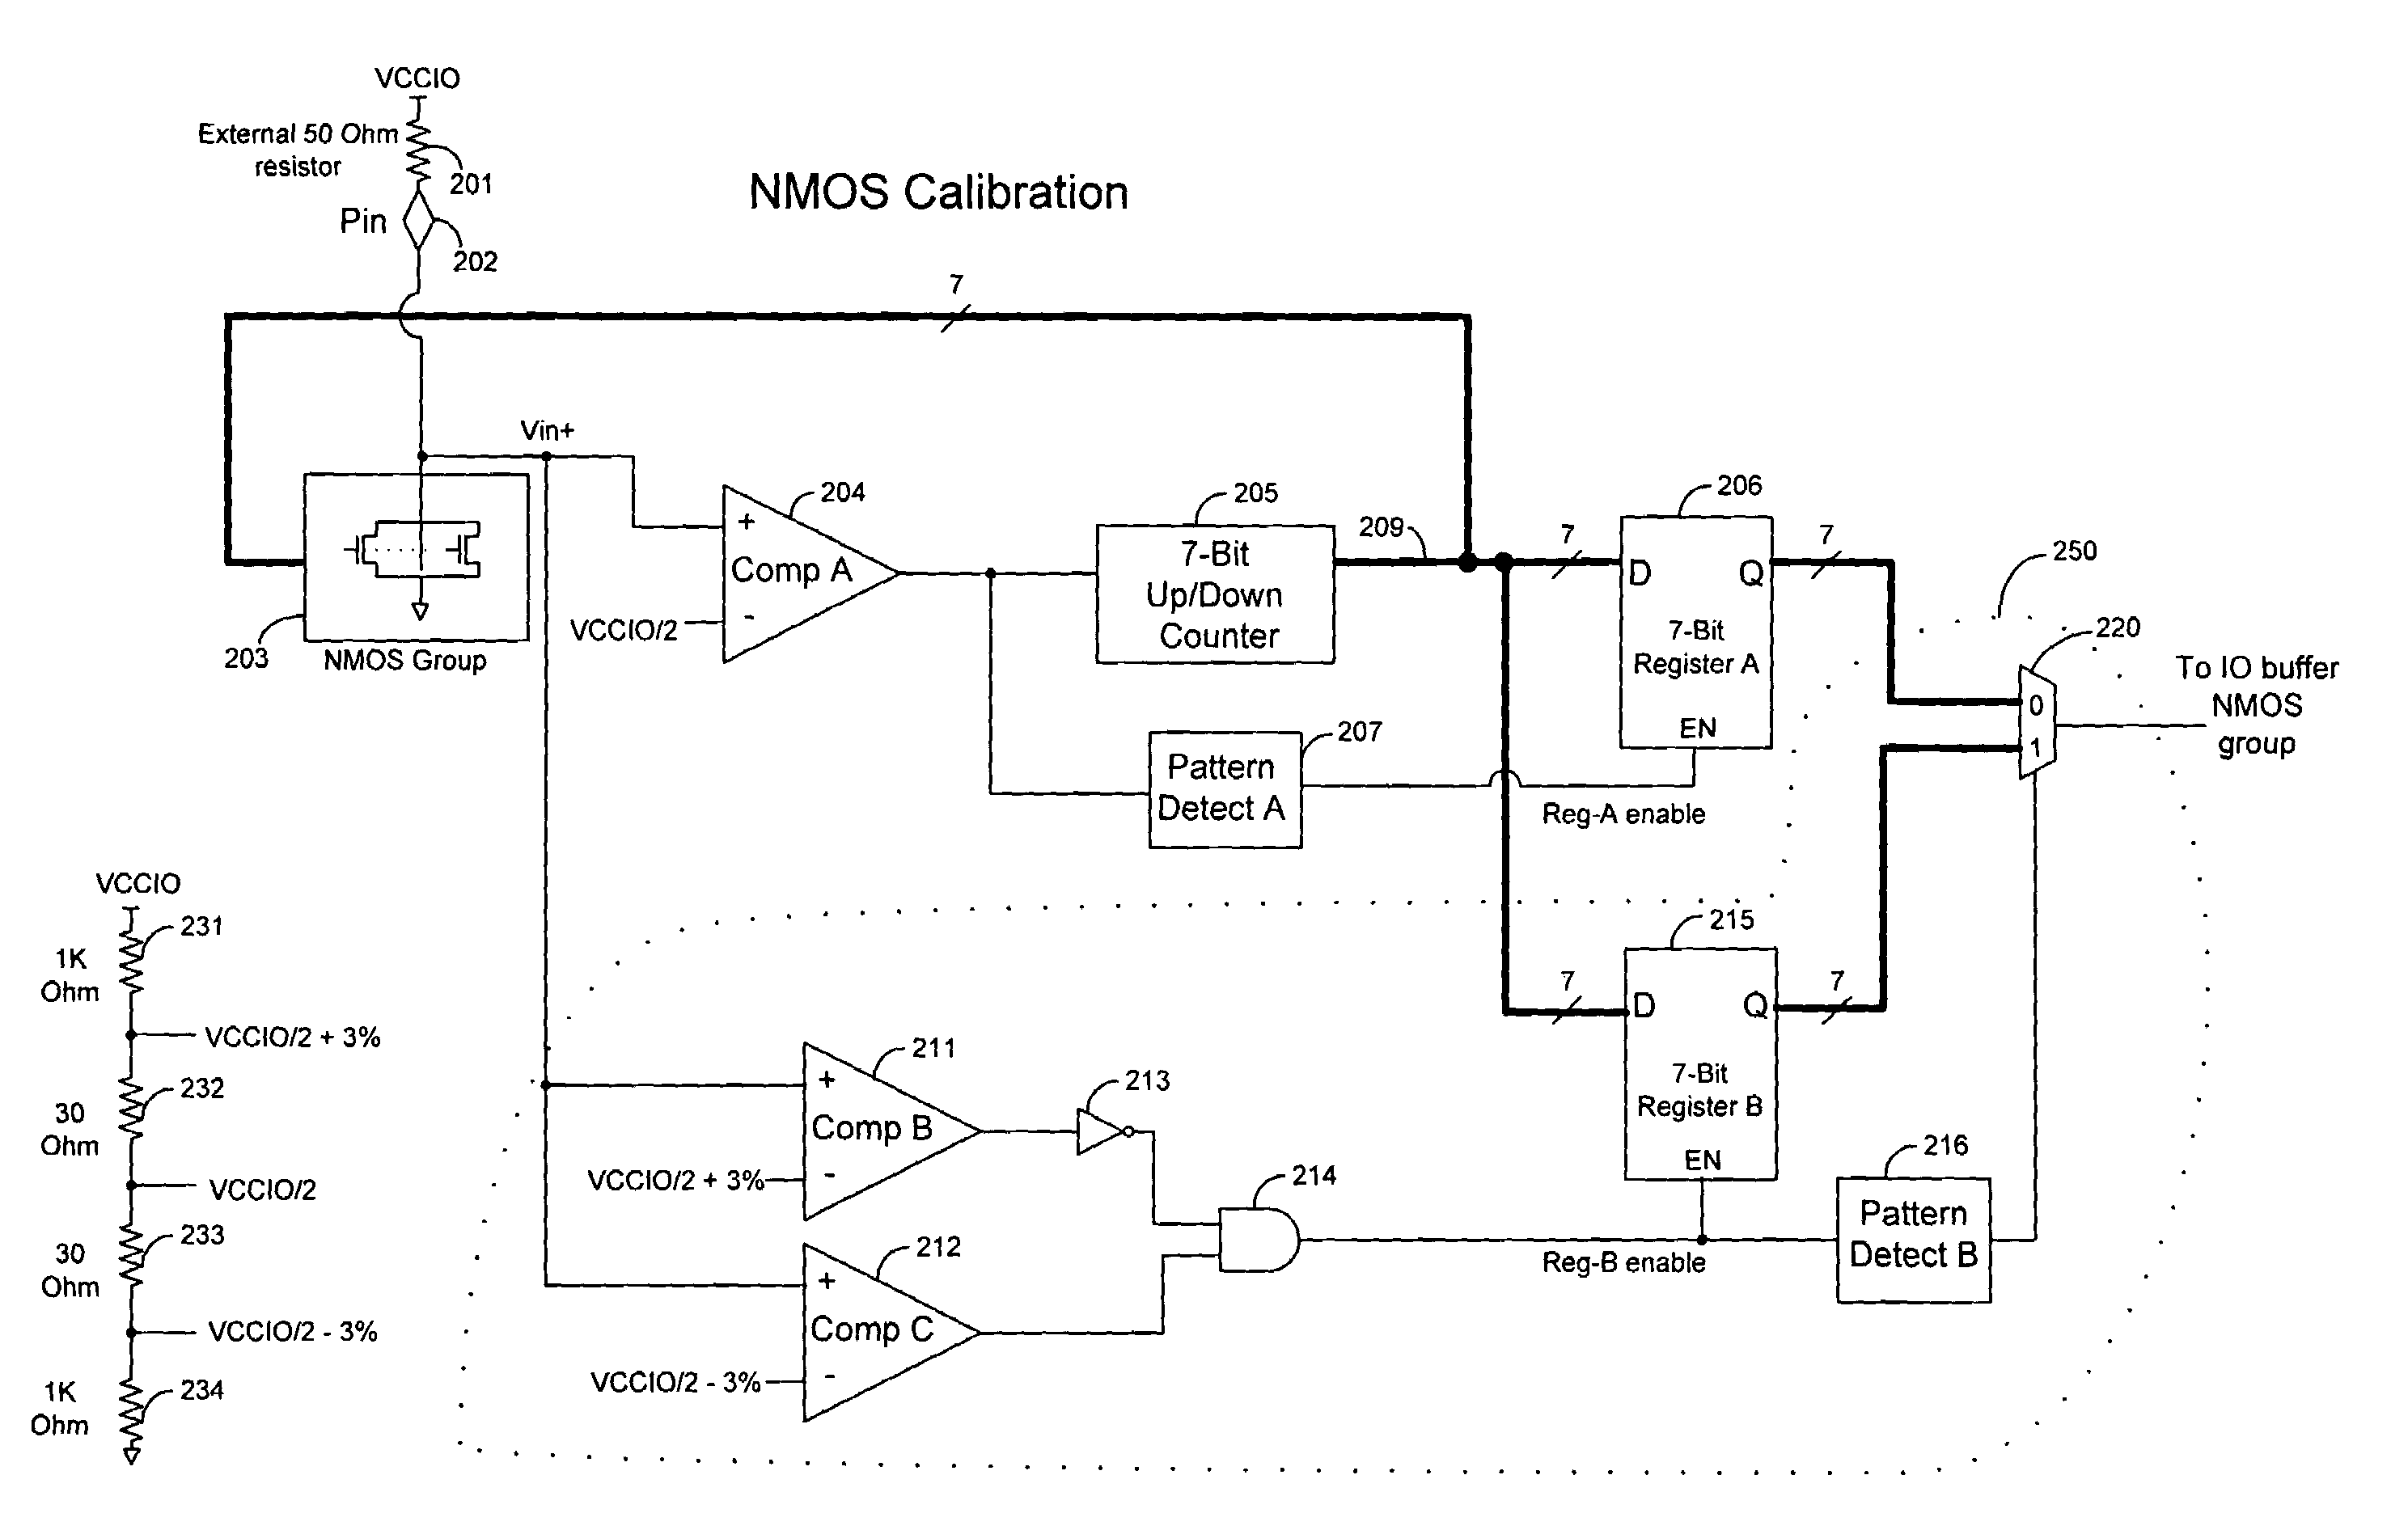 Techniques for controlling on-chip termination resistance using voltage range detection